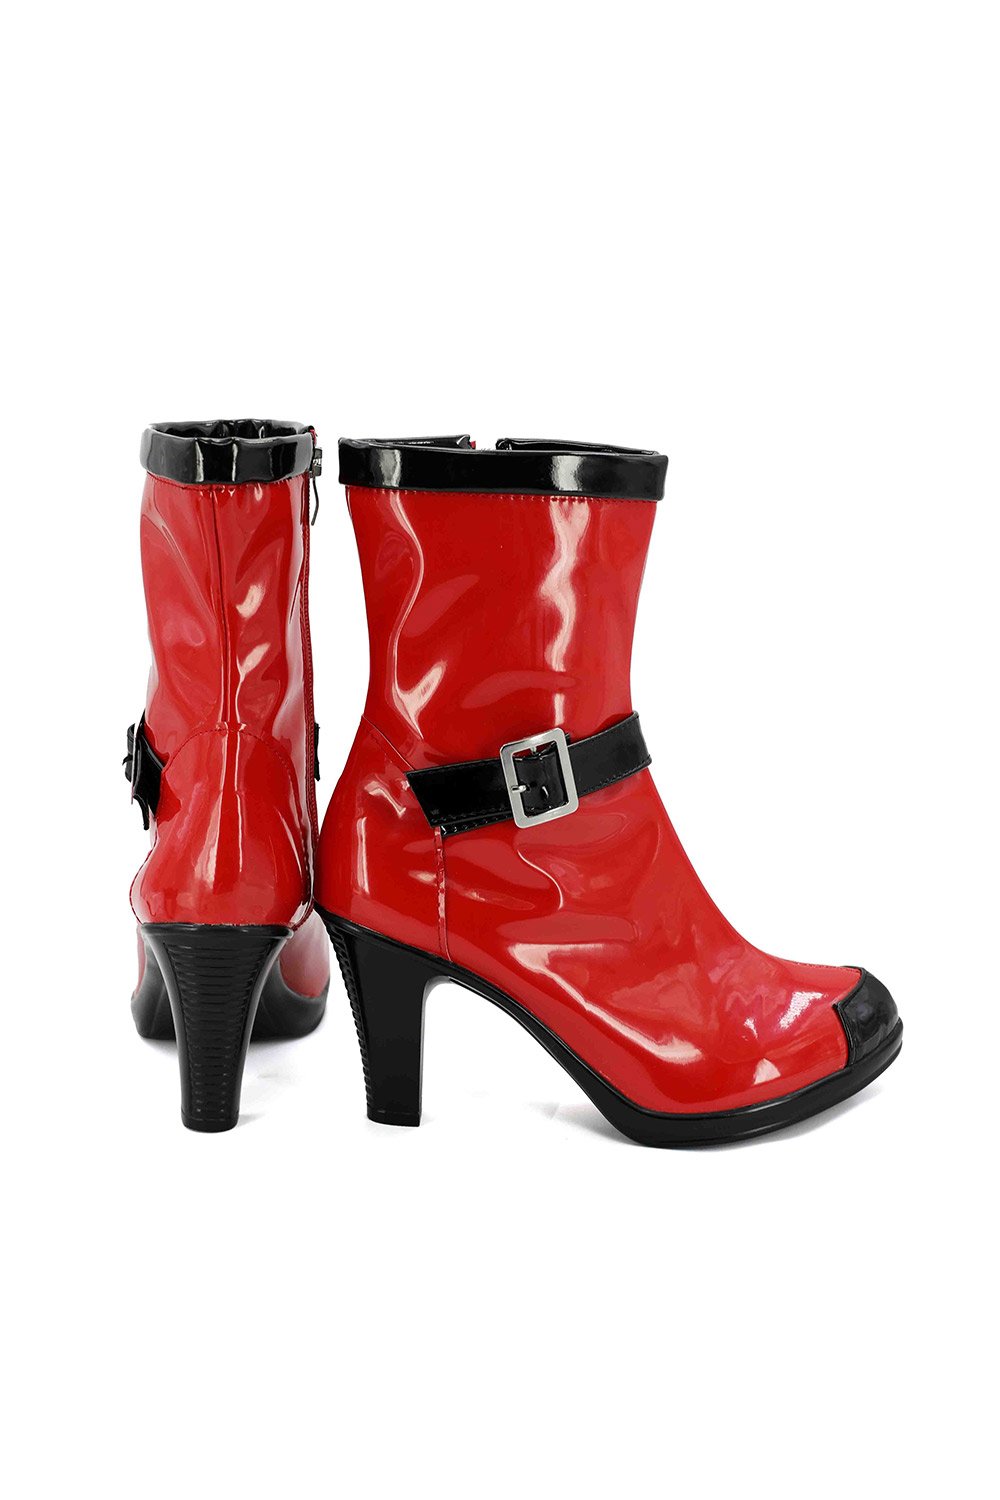 Deadpool Cosplay Female Version Boots Cosplay Shoes